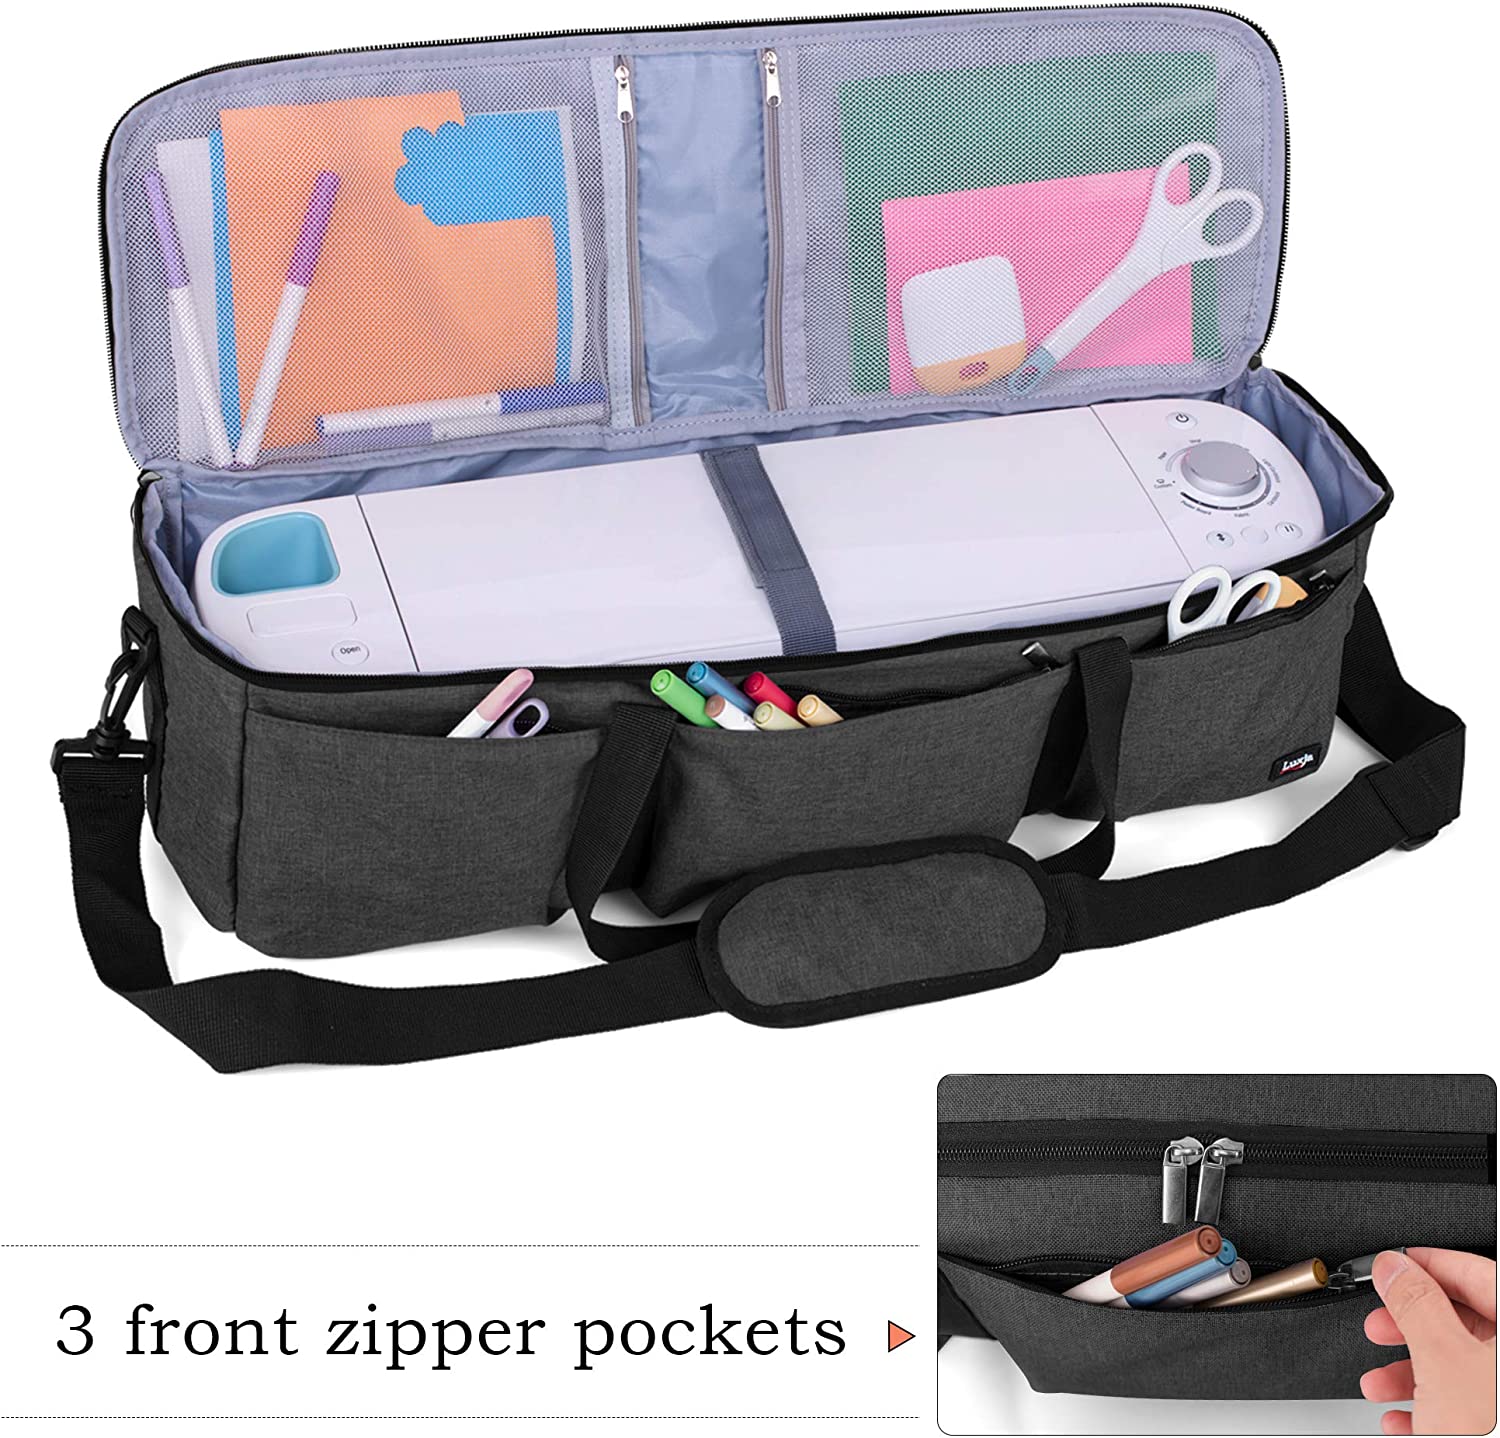 LUXJA, Luxja Foldable Bag Compatible with Cricut Explore Air and Maker, Carrying Bag Compatible with Cricut Explore Air and Supplies (Bag Only), Black, Bag for Machine